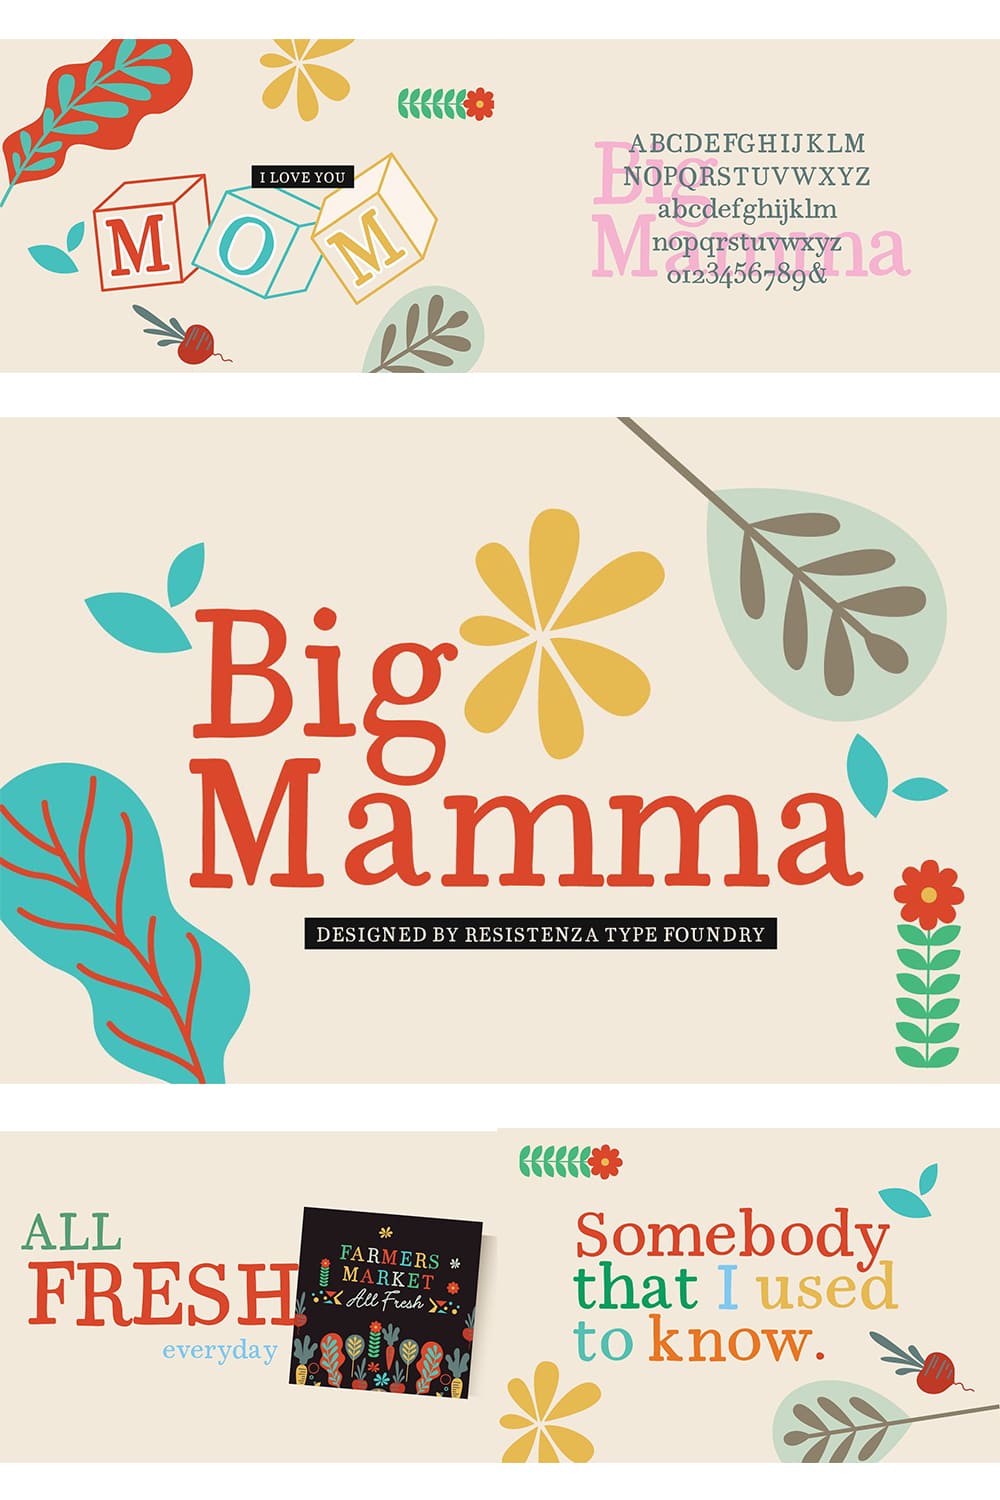 Big Mamma Font - Designed By Resistenza Type Foundry.